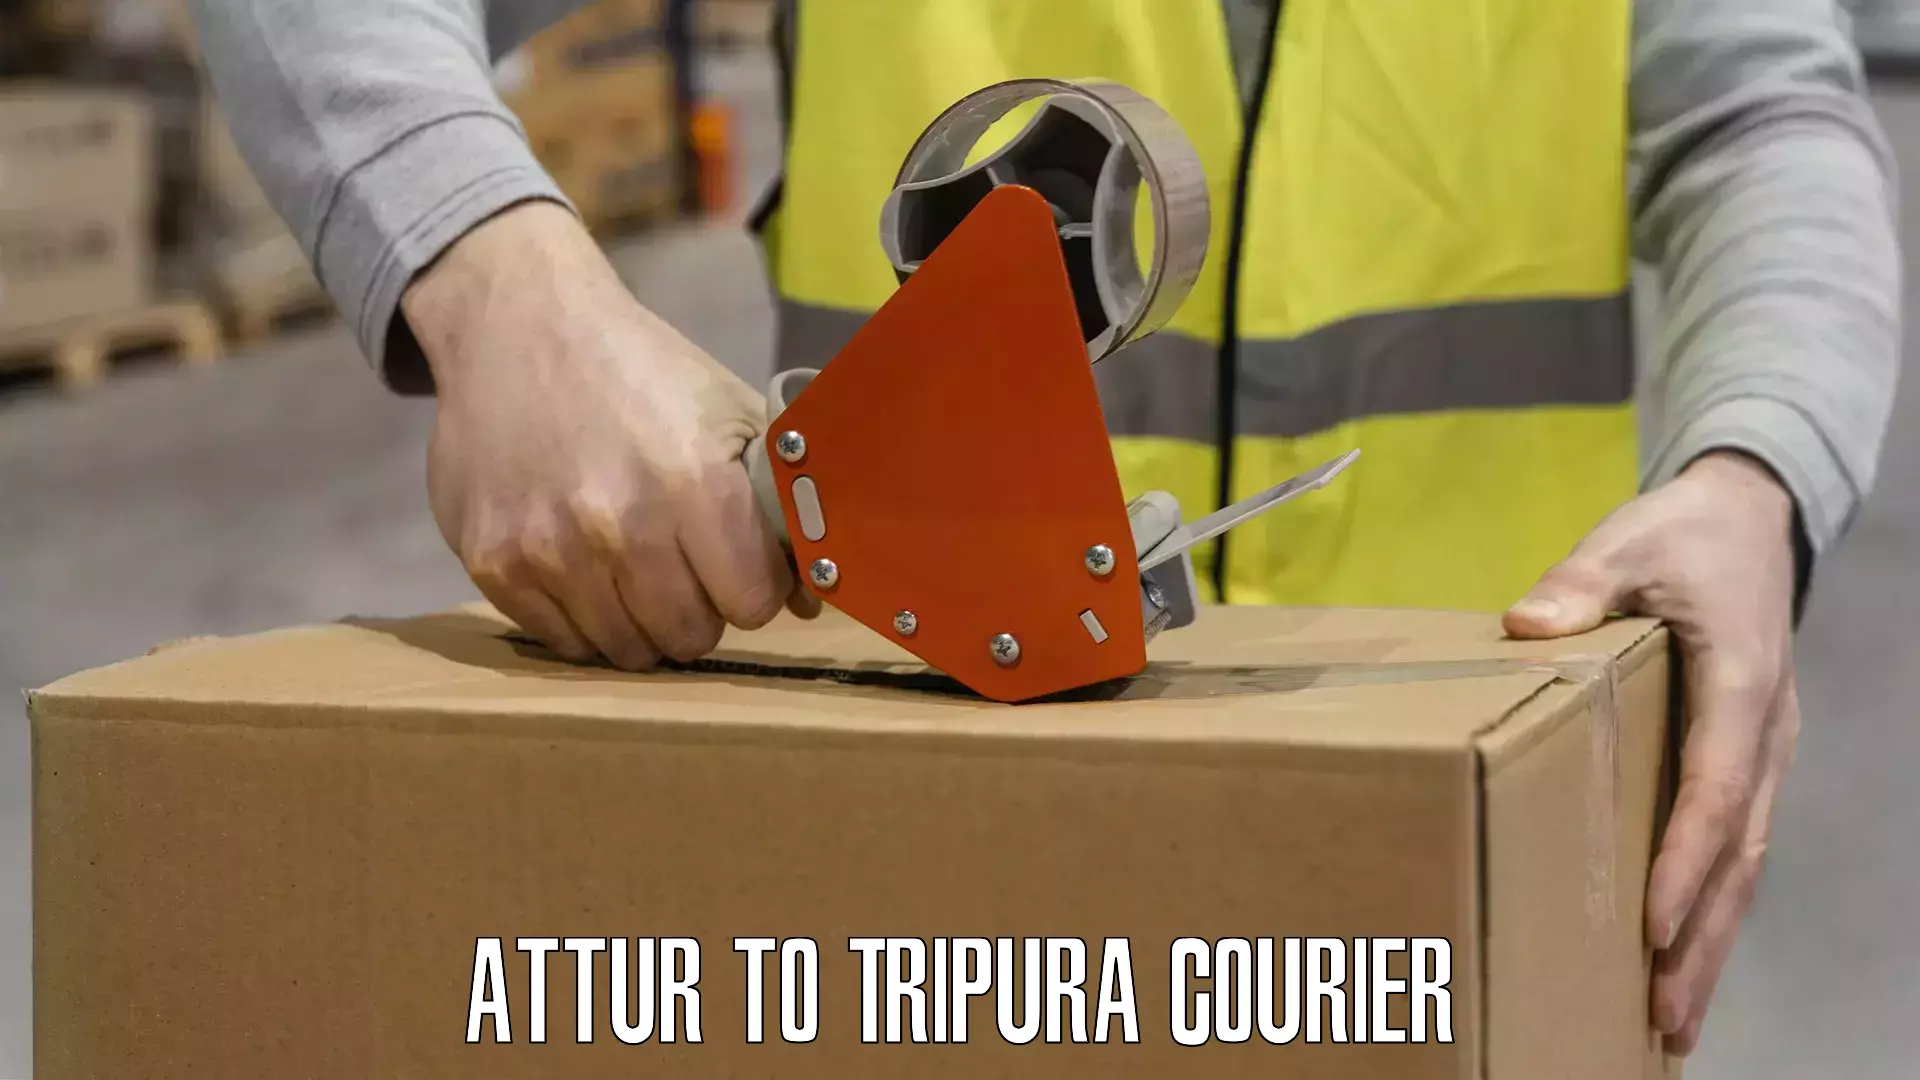 Courier service booking Attur to Tripura